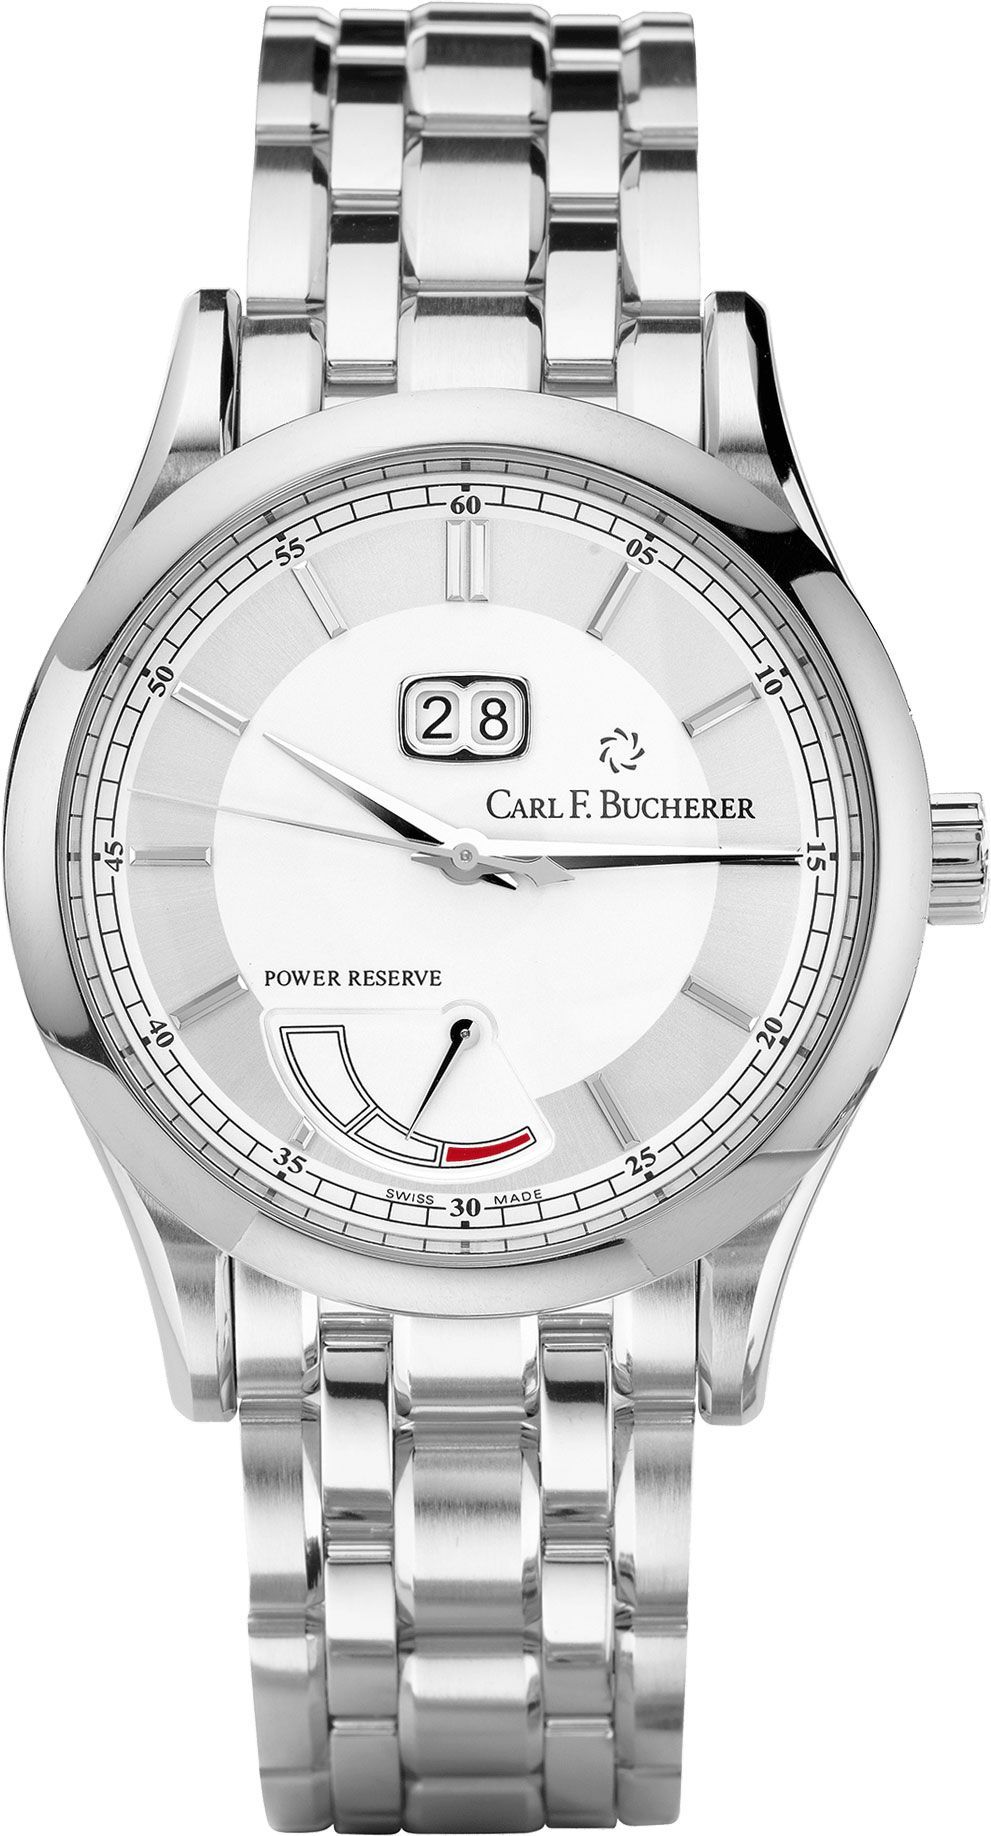 Carl F. Bucherer Manero Power Reserve Silver Dial 40 mm Automatic Watch For Men - 1